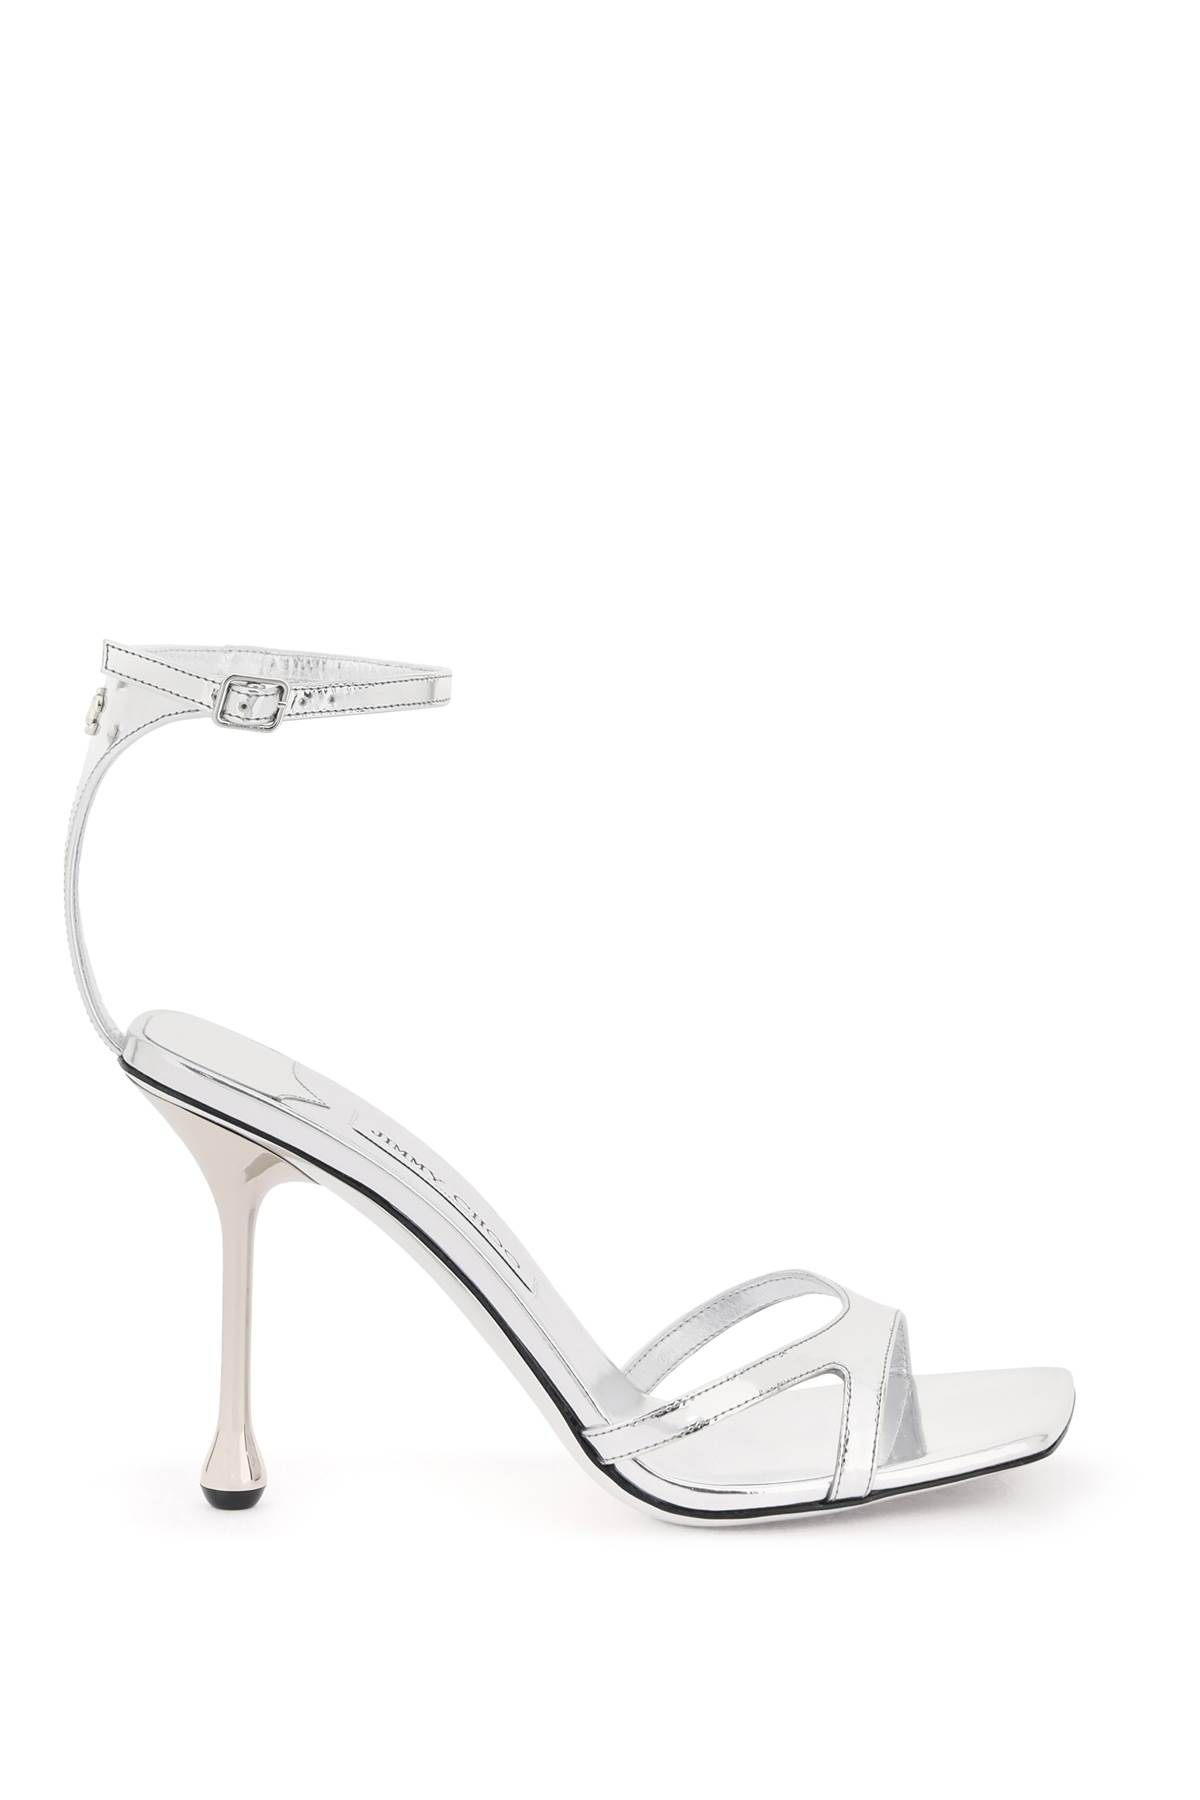 Shop Jimmy Choo Ixia Sandals In Silver